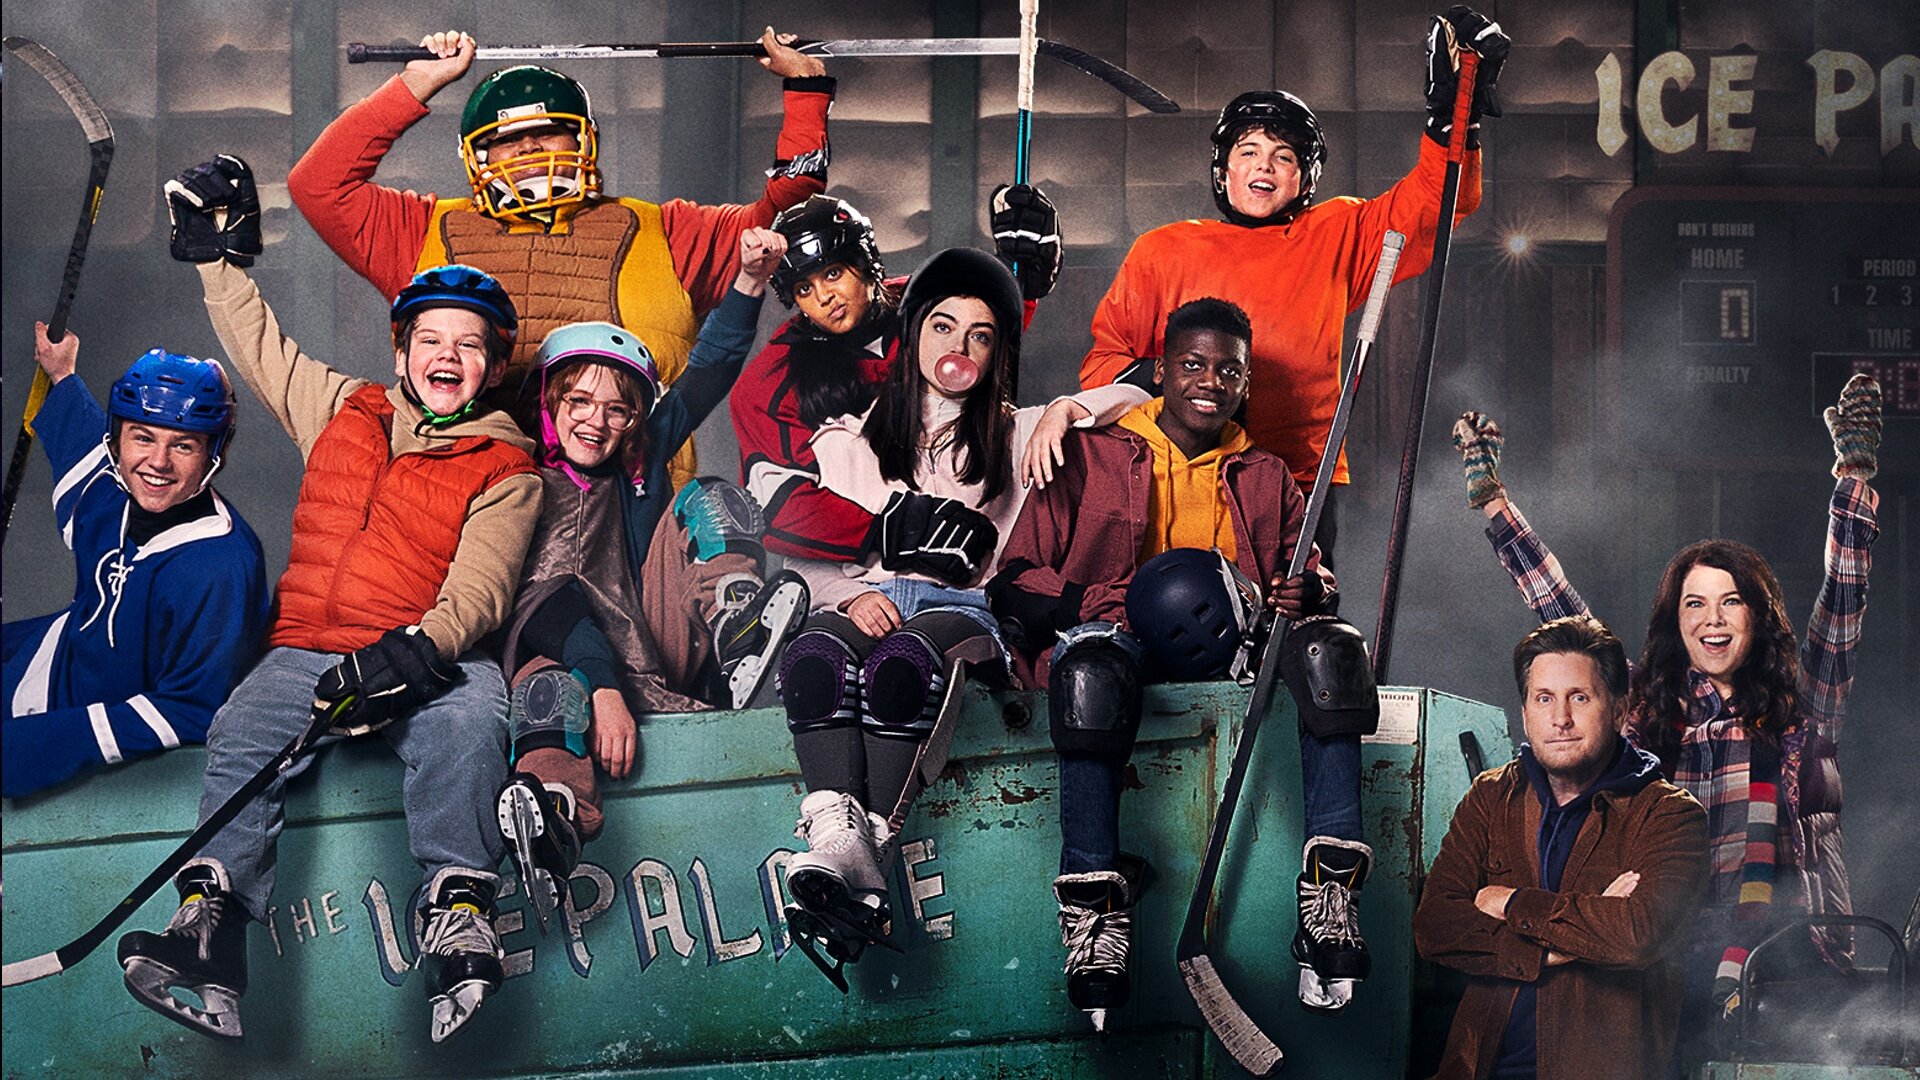 The Mighty Ducks: Game Changers, Disney Wiki